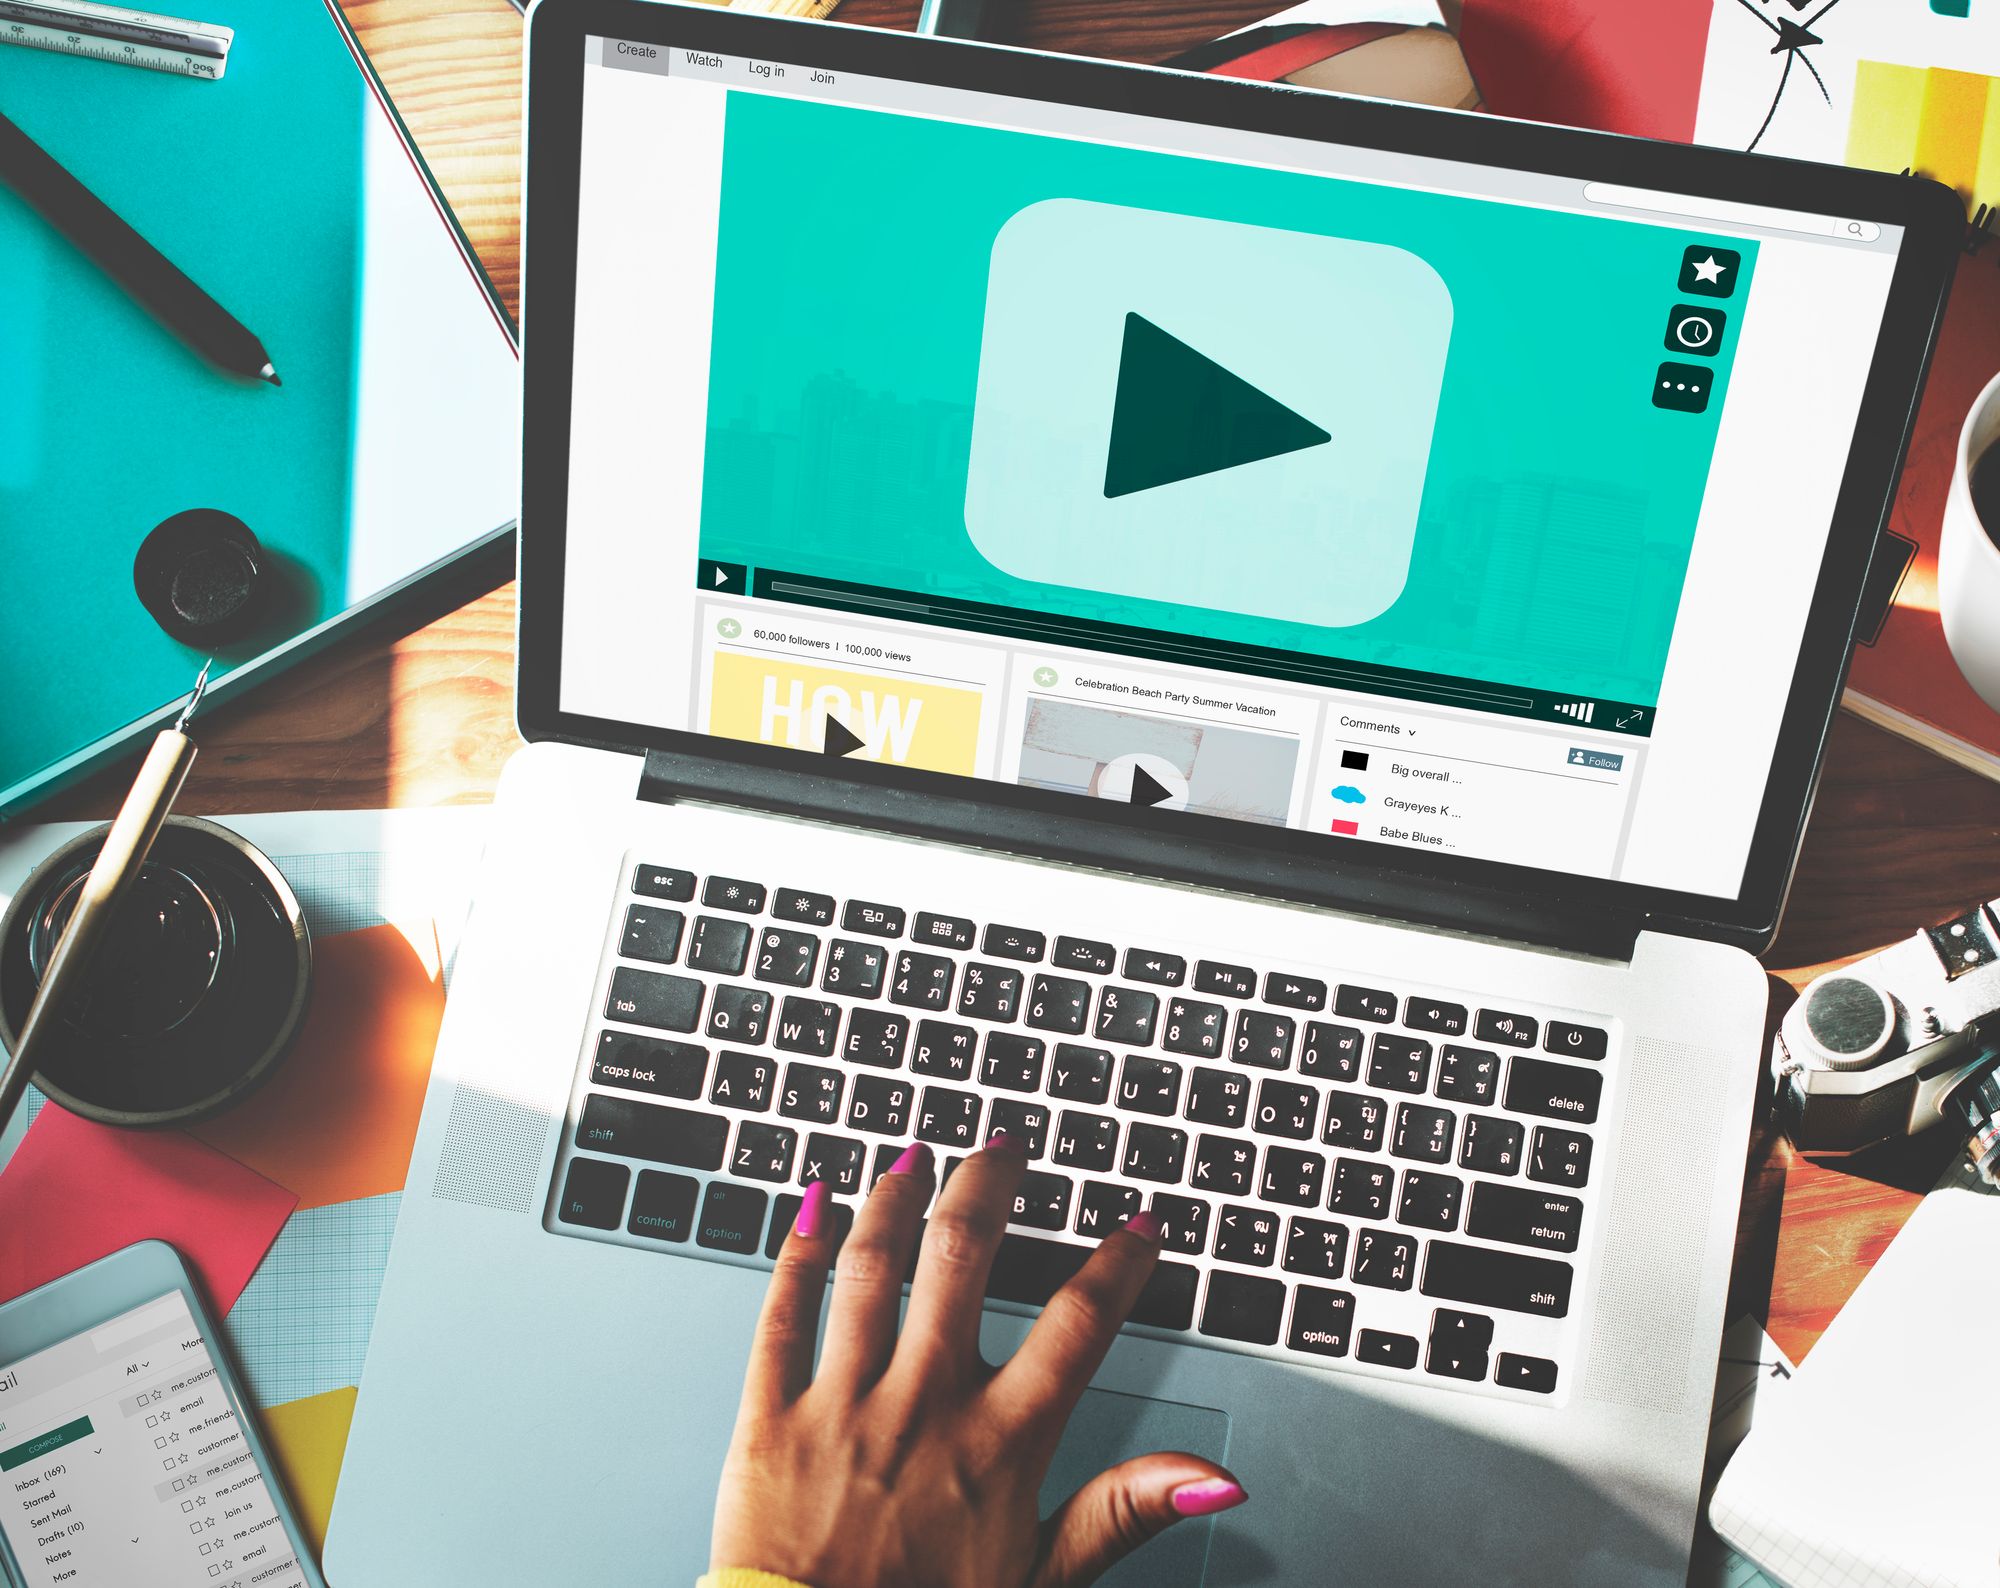 7 Industries Where Video Marketing is Booming